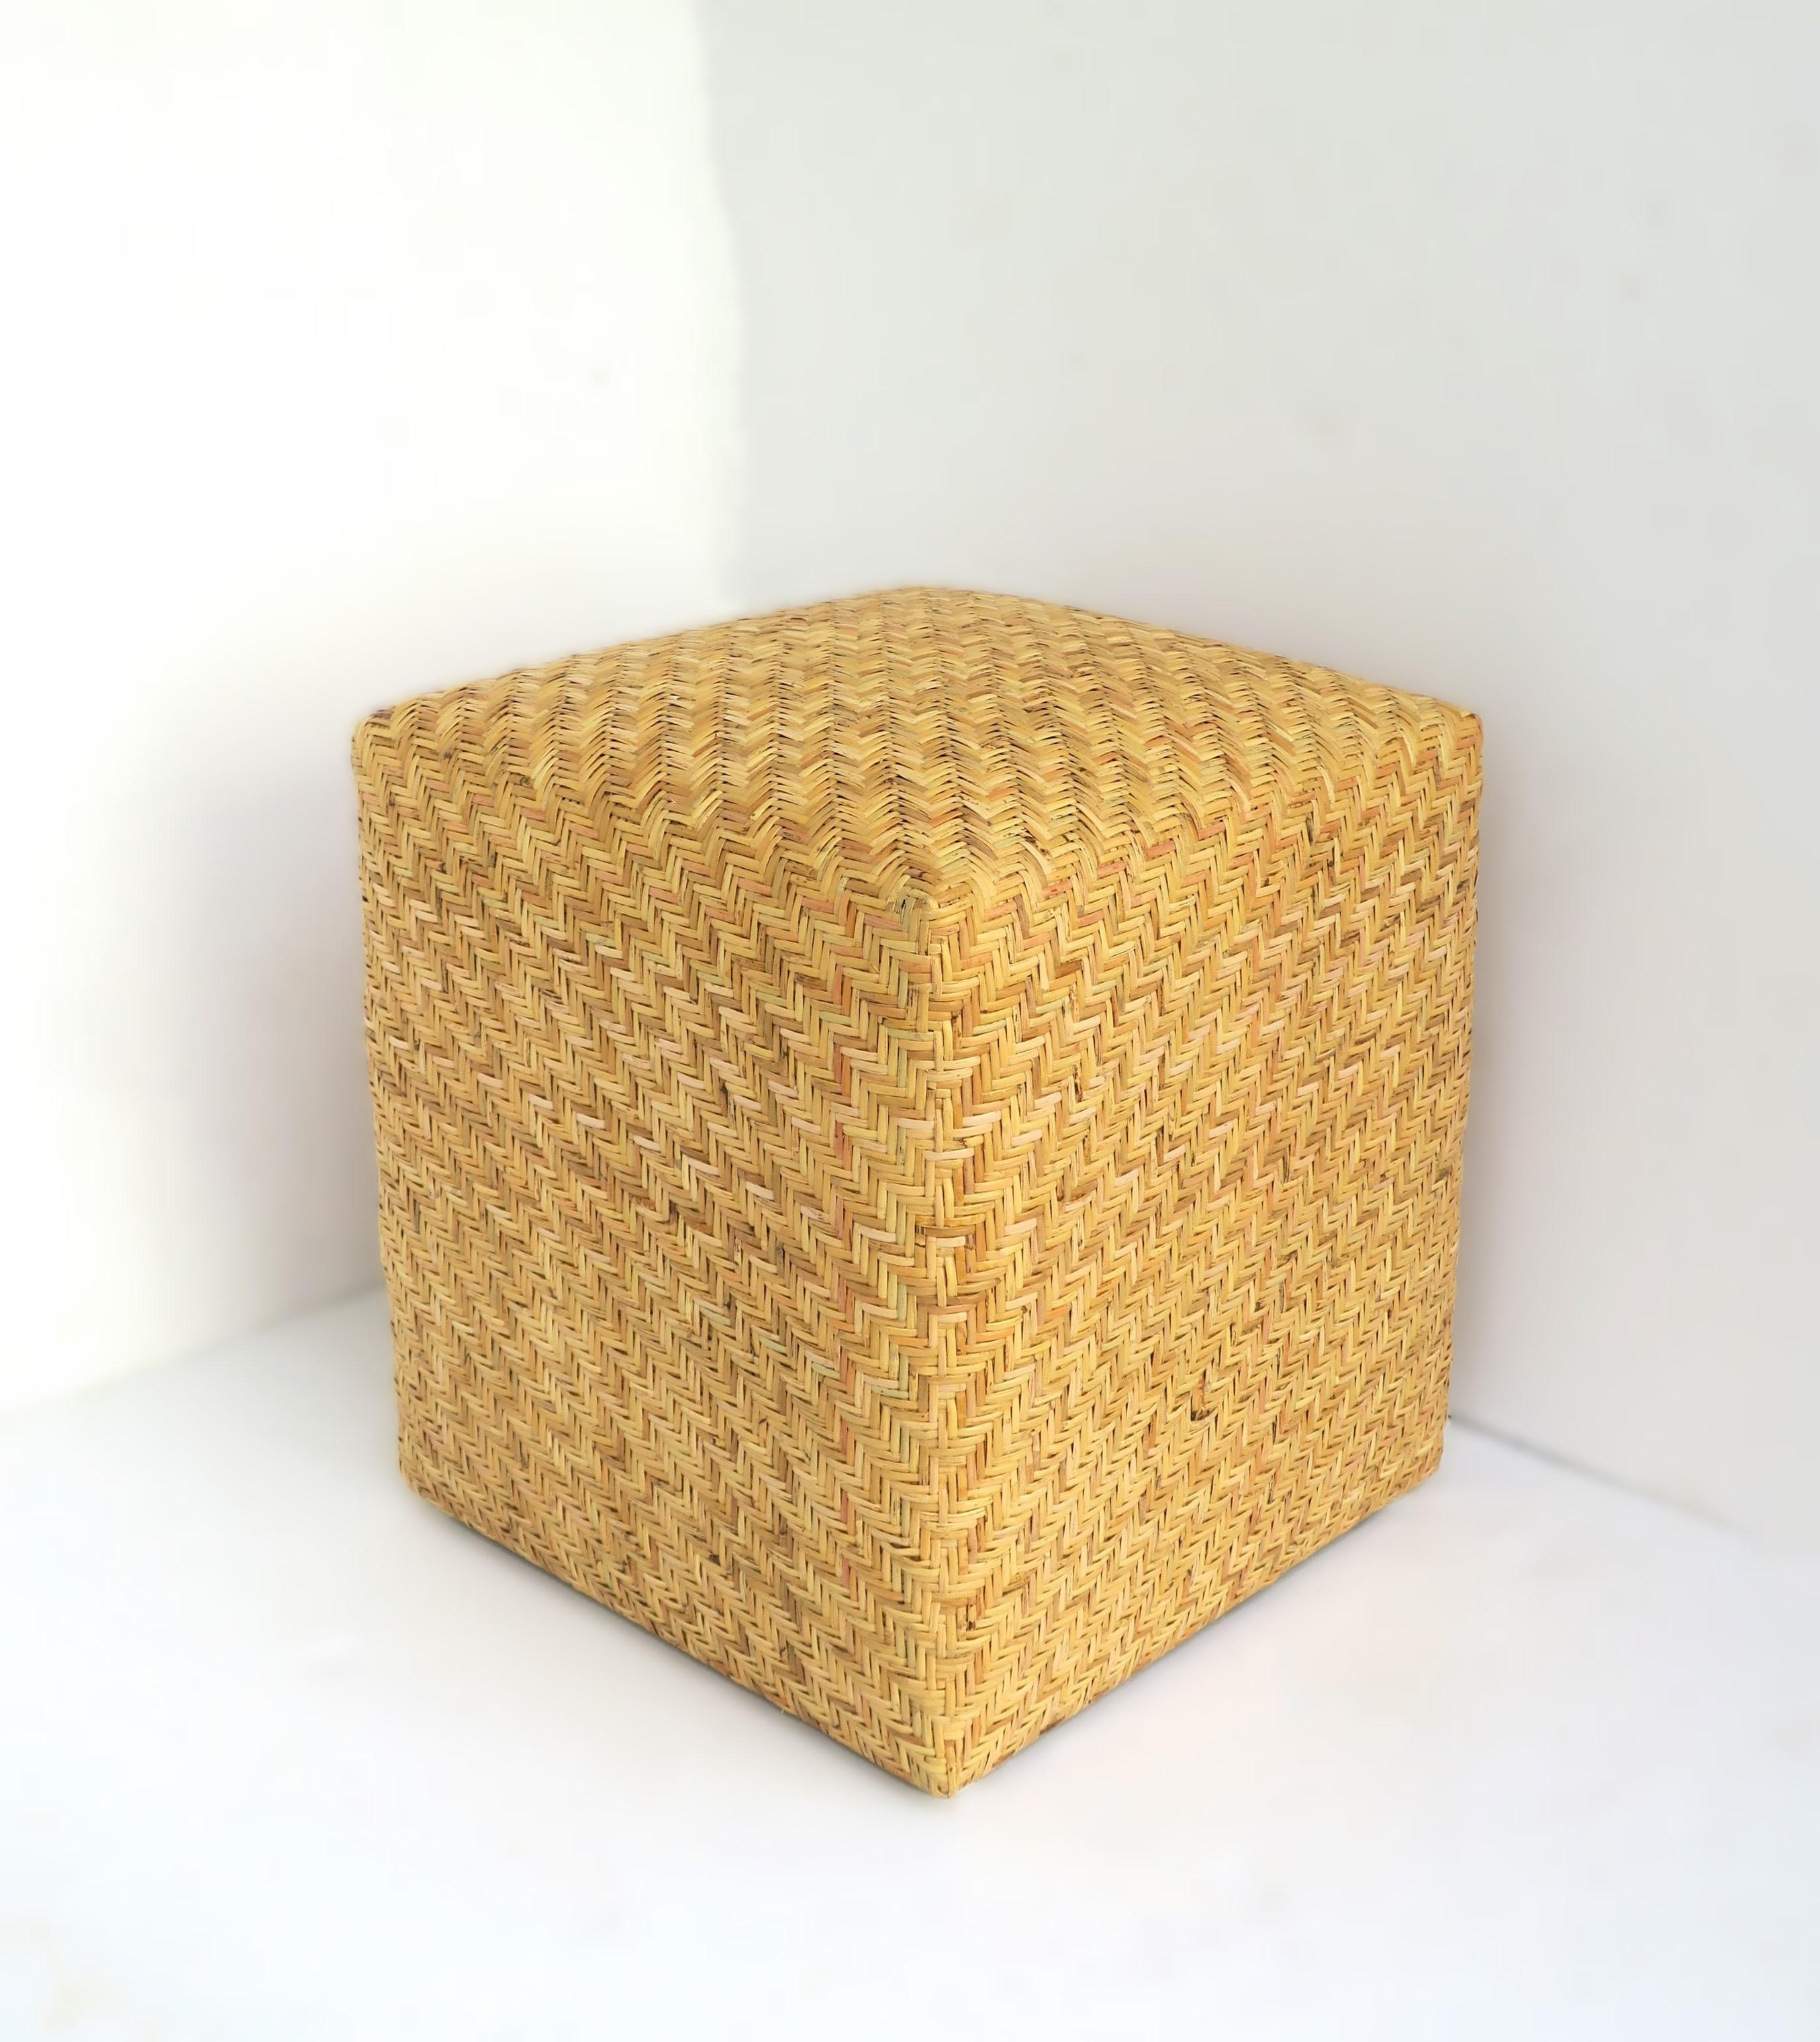 A blonde/tan weaved wicker pedestal stool ottoman seat. An all-wicker weaved stool with a chevron-esque pattern design. Seat is comfortable yet firm. Piece could also double as a footstool or side/drinks table with firm environment on top, e.g.